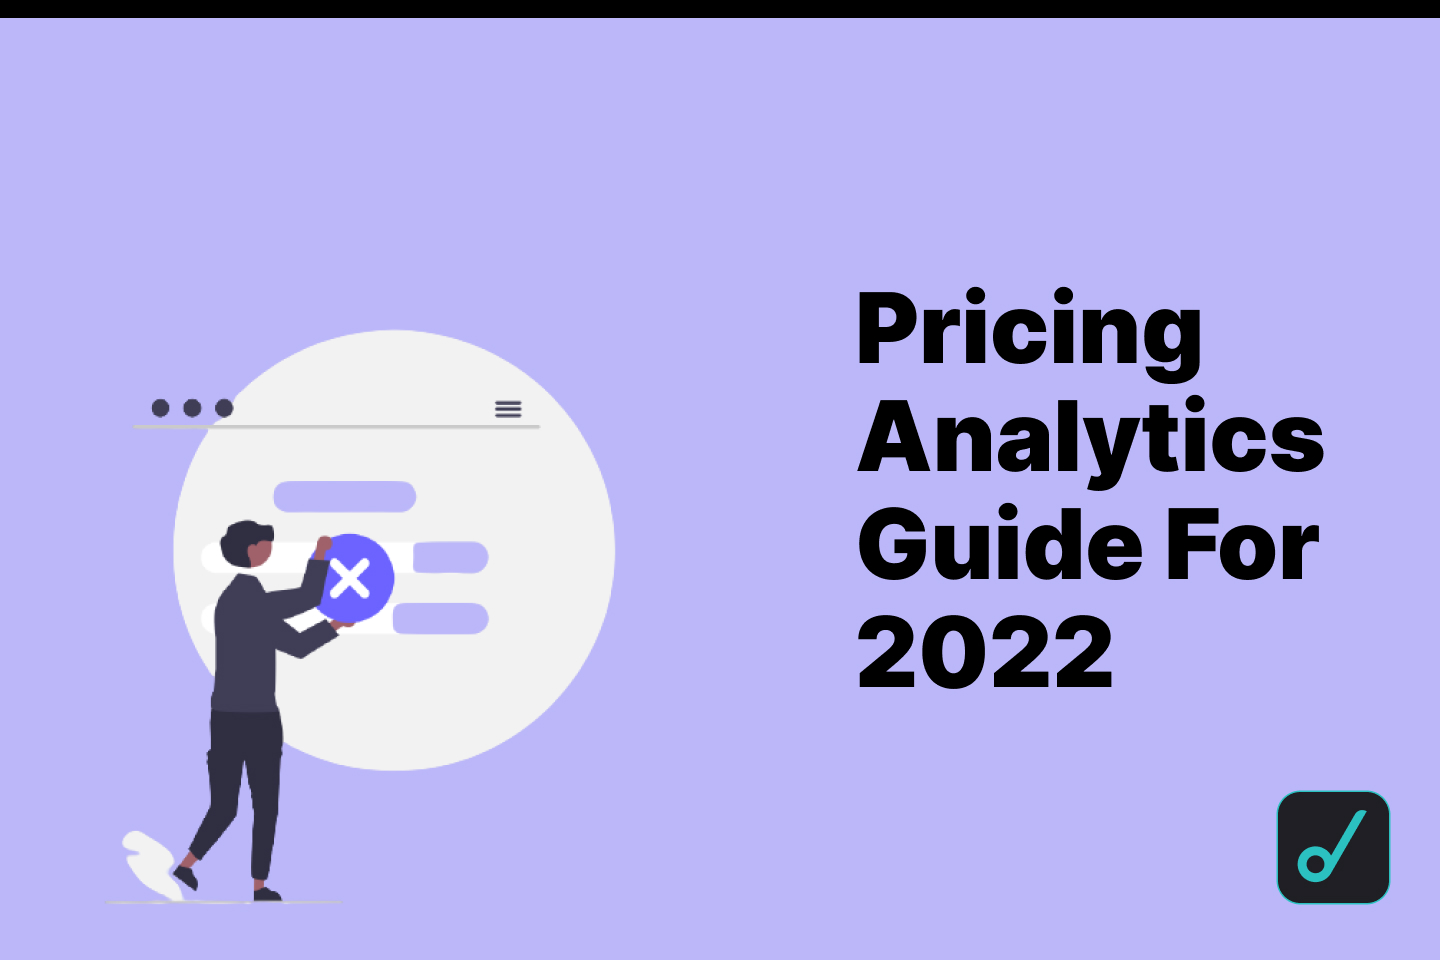 Pricing Analytics Guide For 2022